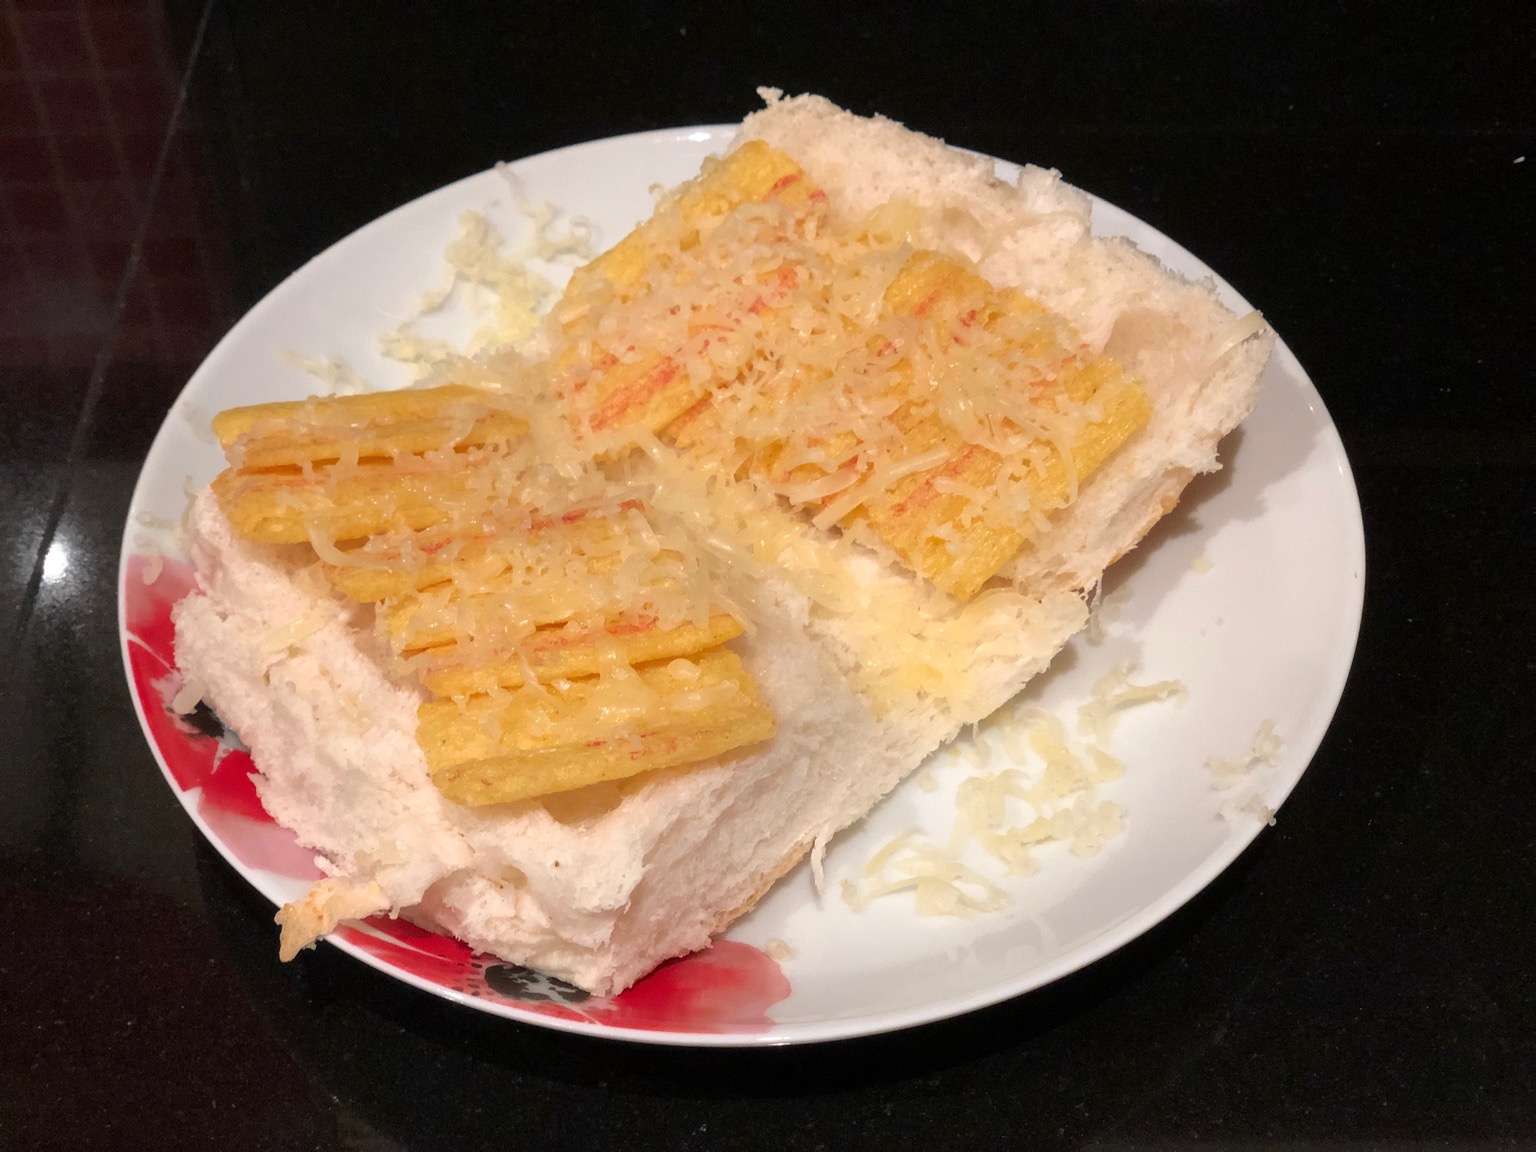 Frazzles and grated cheese on an open white roll